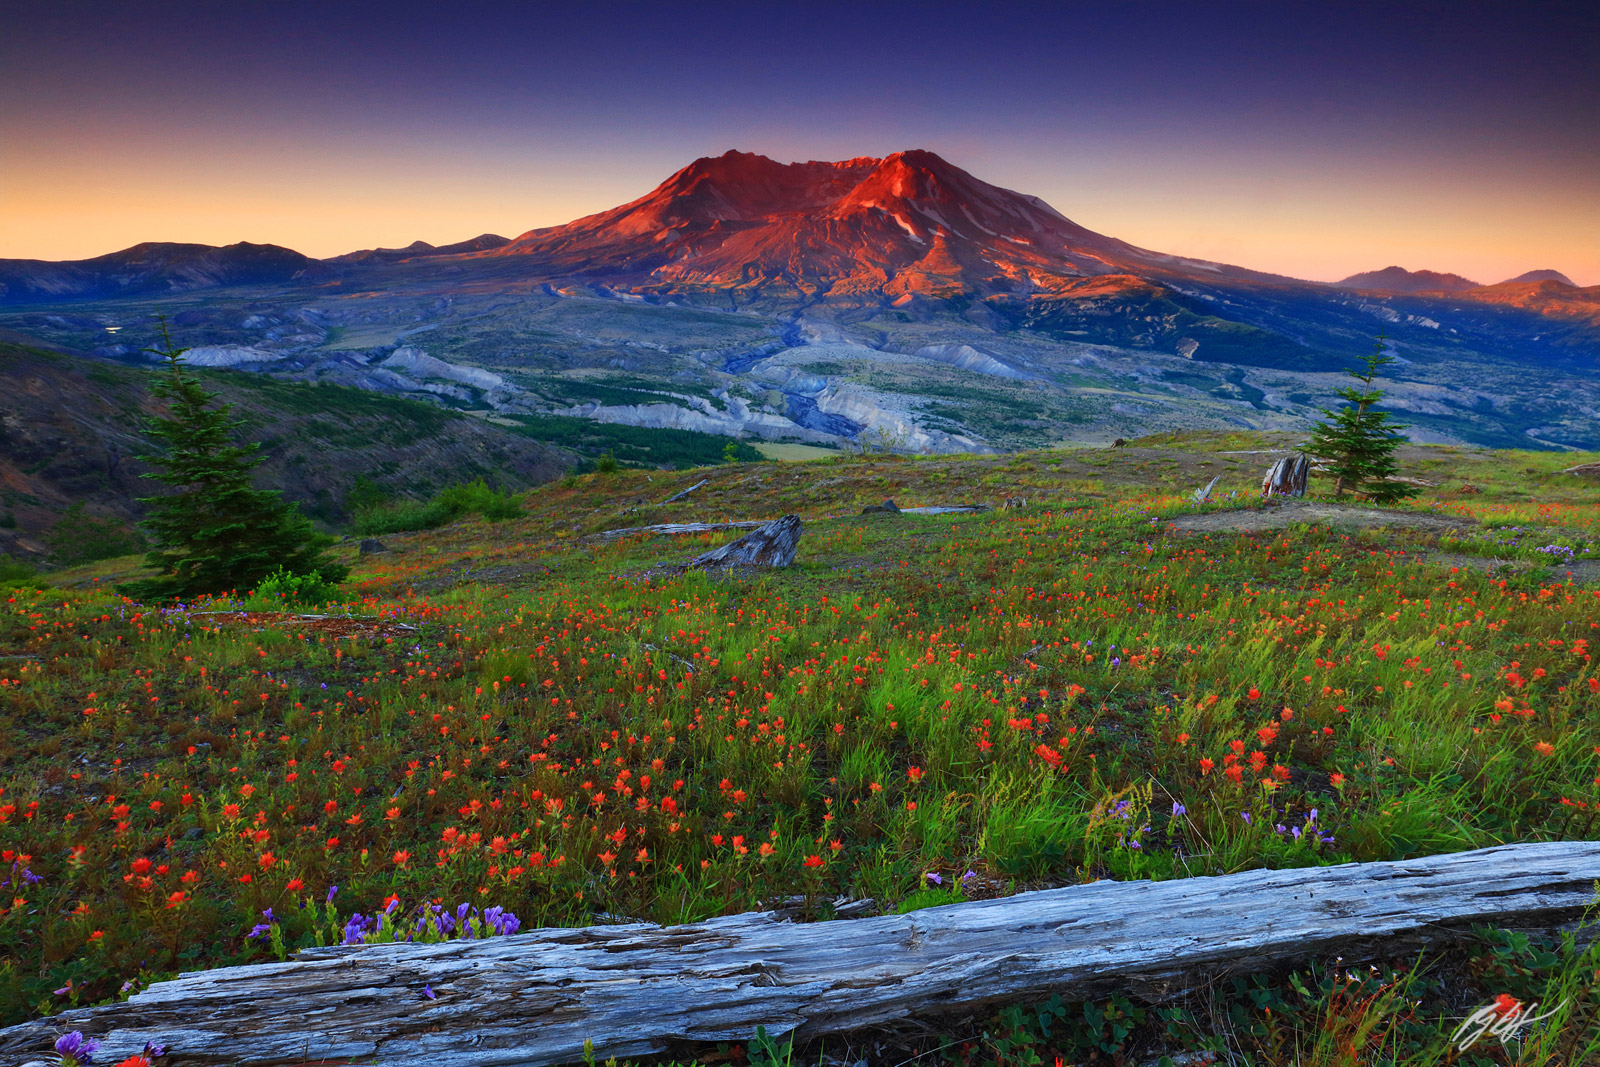 Sunrise Wildflowers and Mt St Helens from Johnston Ridge in Mt St Helens National Volcanic Monument in Washington